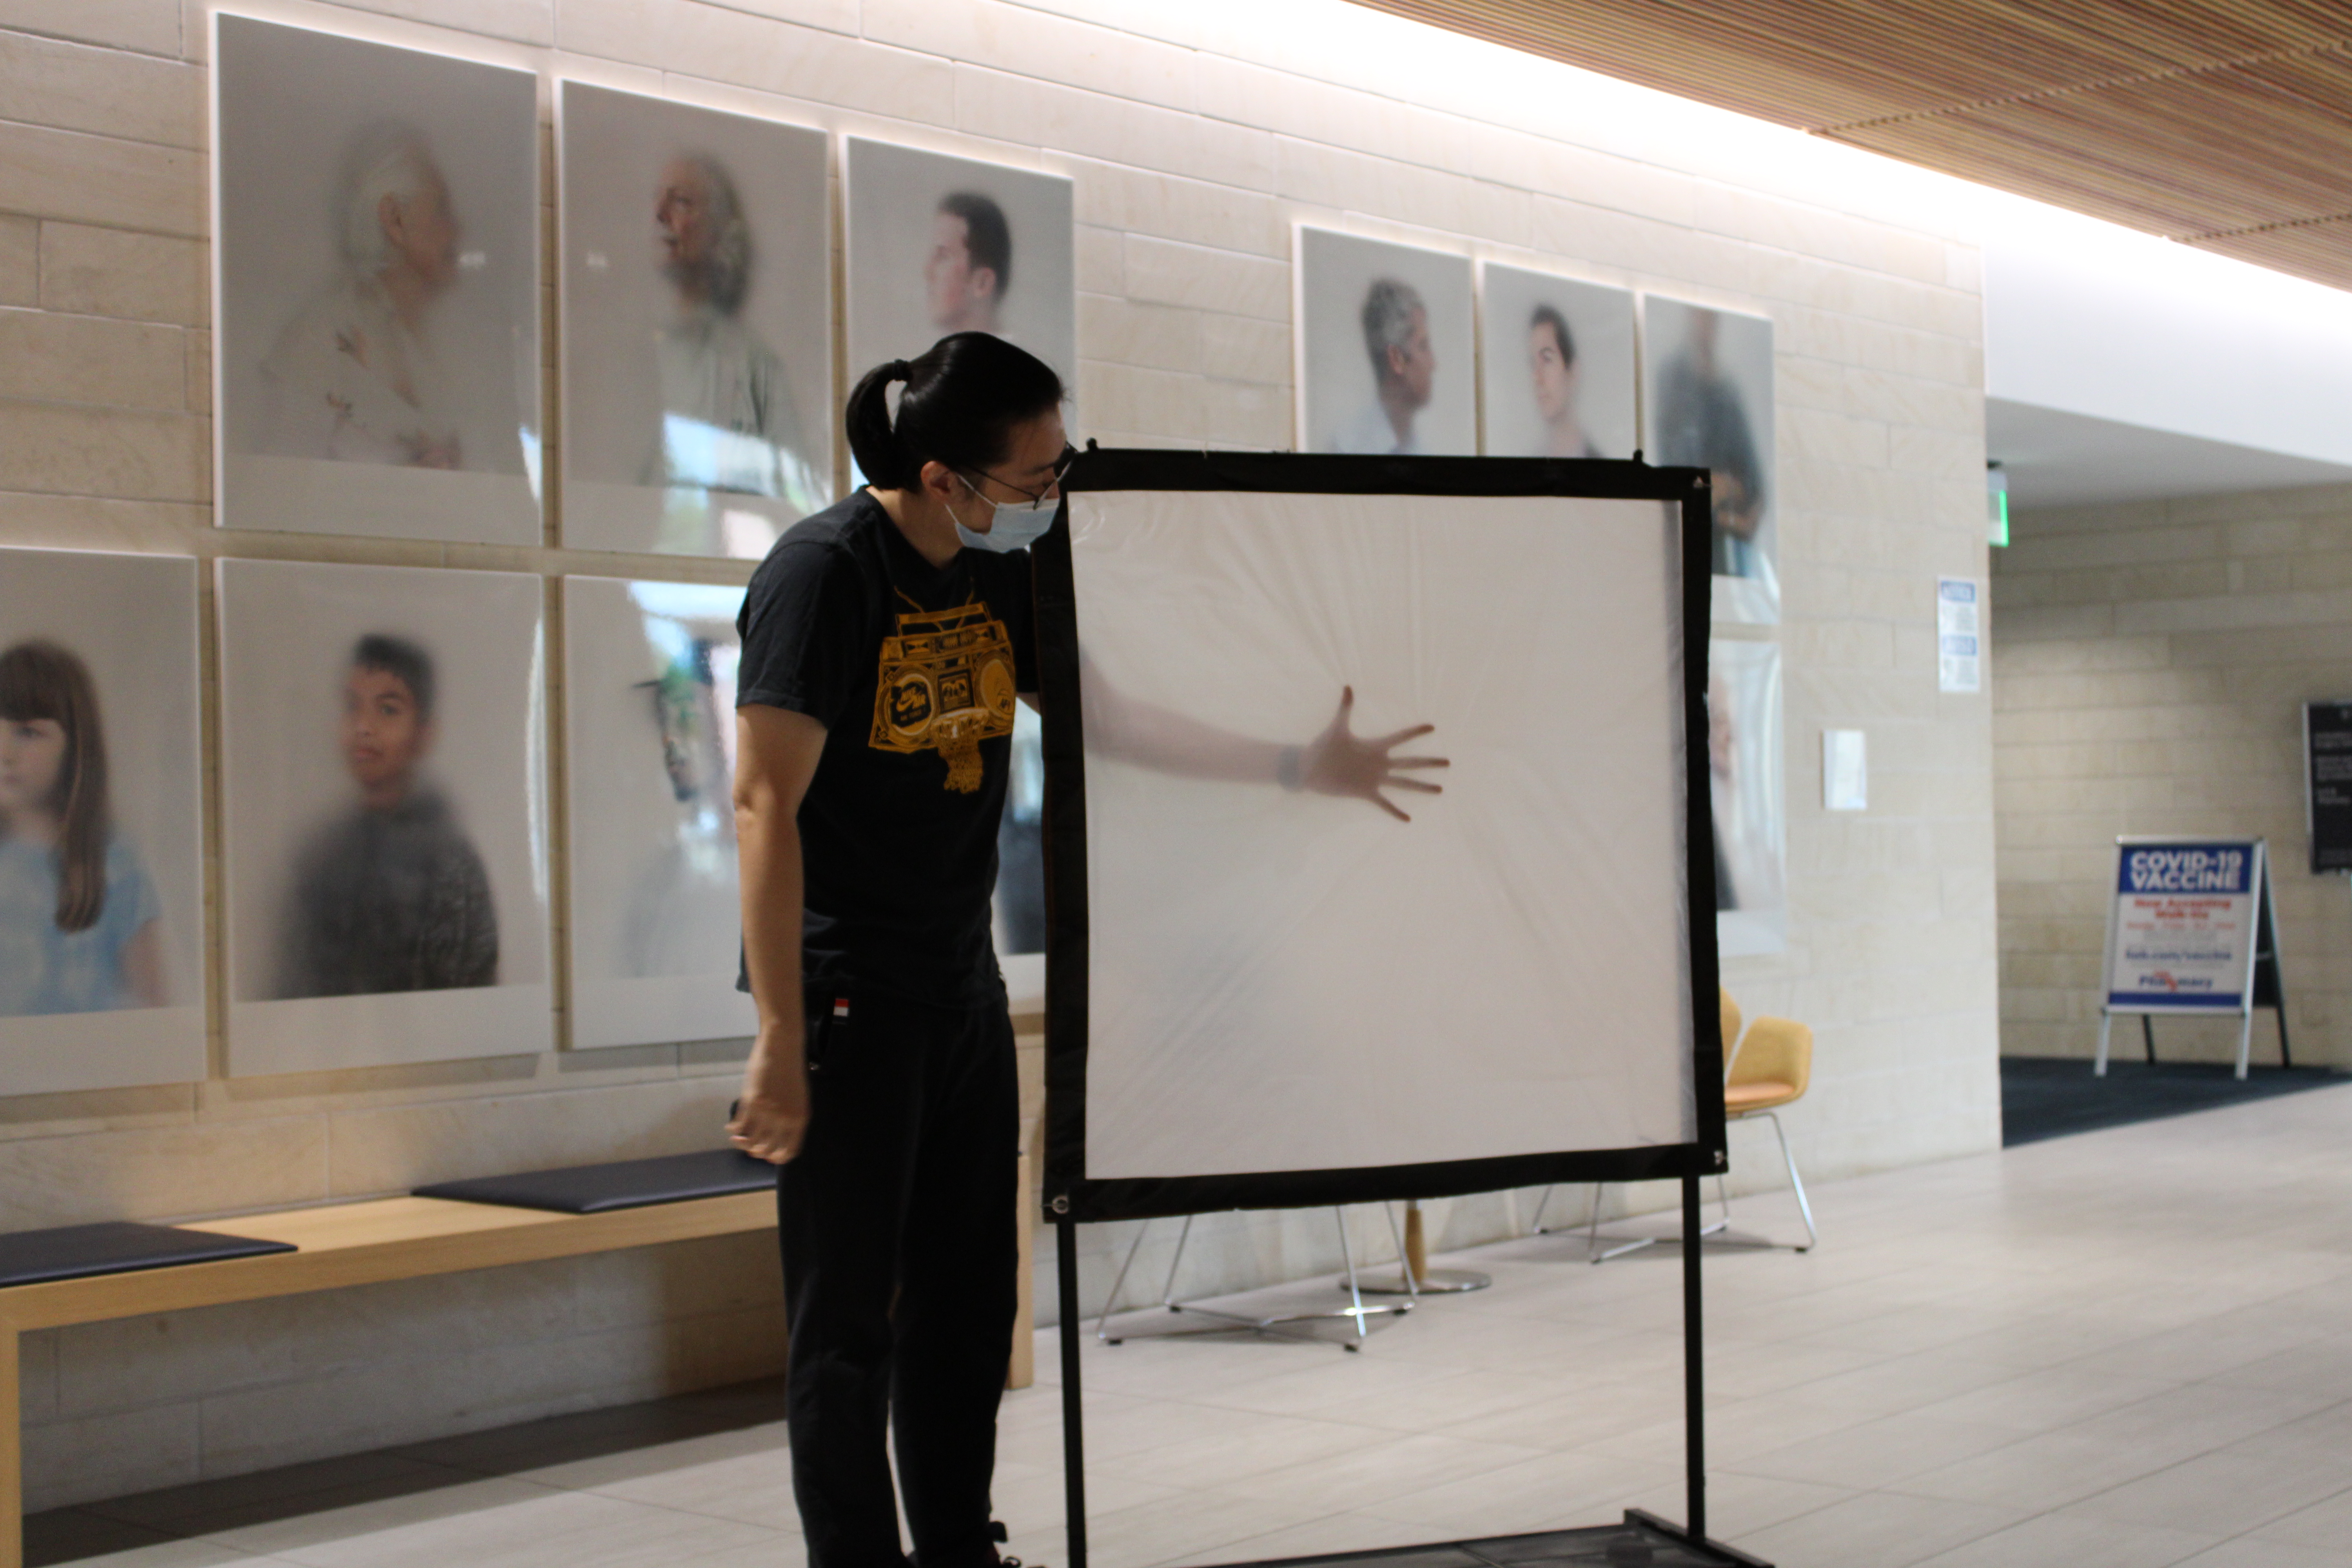 A student holds their hand behind a opaque screen which resembles Ann Hamilton's process in 